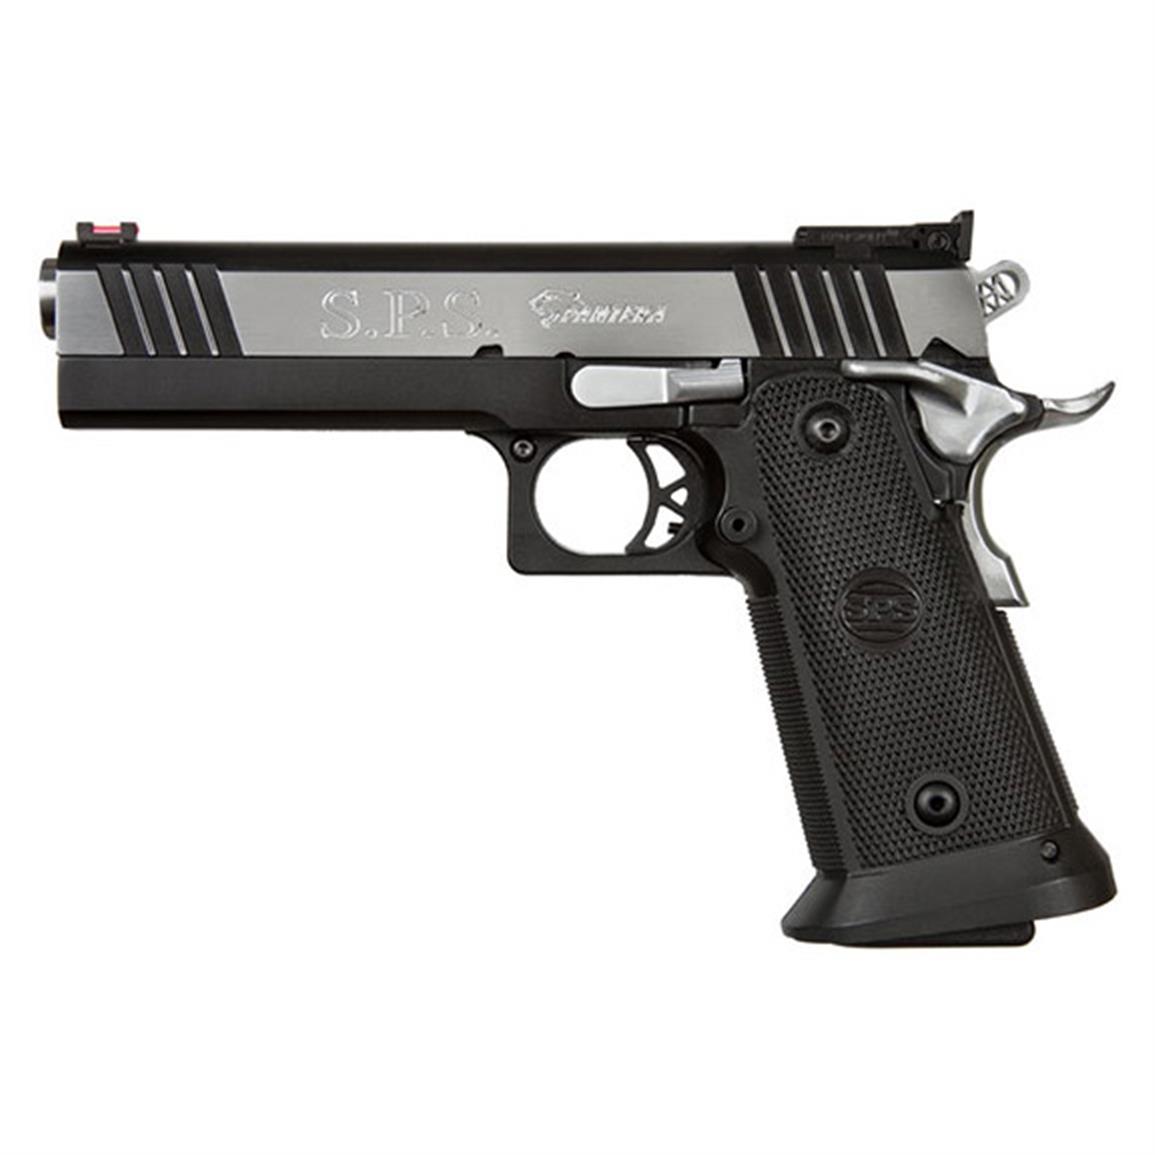 EI Metro Arms SPS Panther, Semi-Automatic, 9mm, 5" Barrel, 21 Rounds